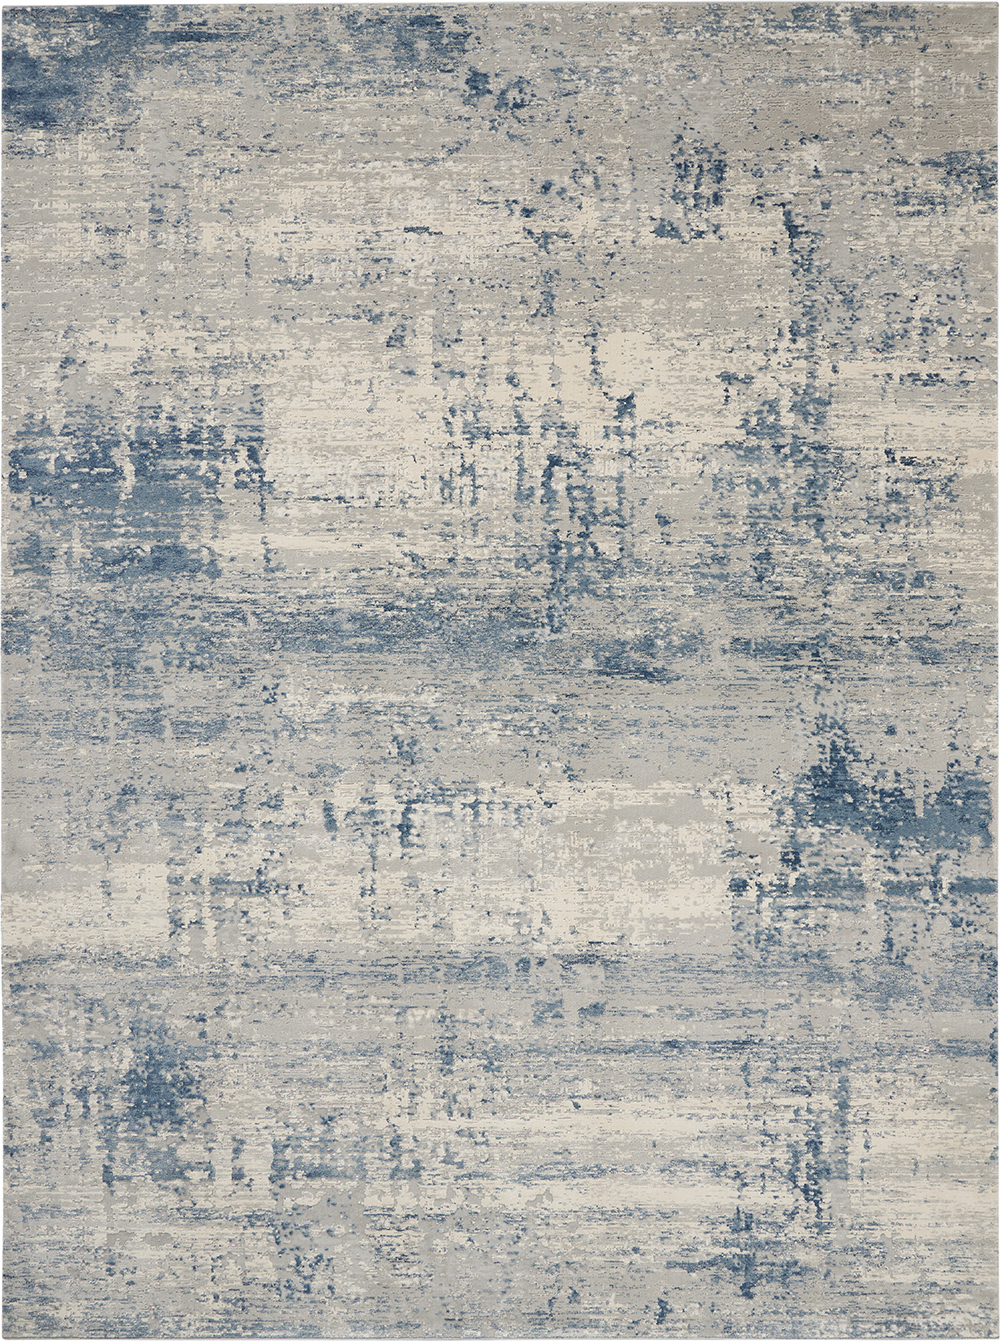 Nourison Rugs - Rustic Textures Rectanglular RUS10 Rug in Ivory / Blue - 3.9m x 2.8m